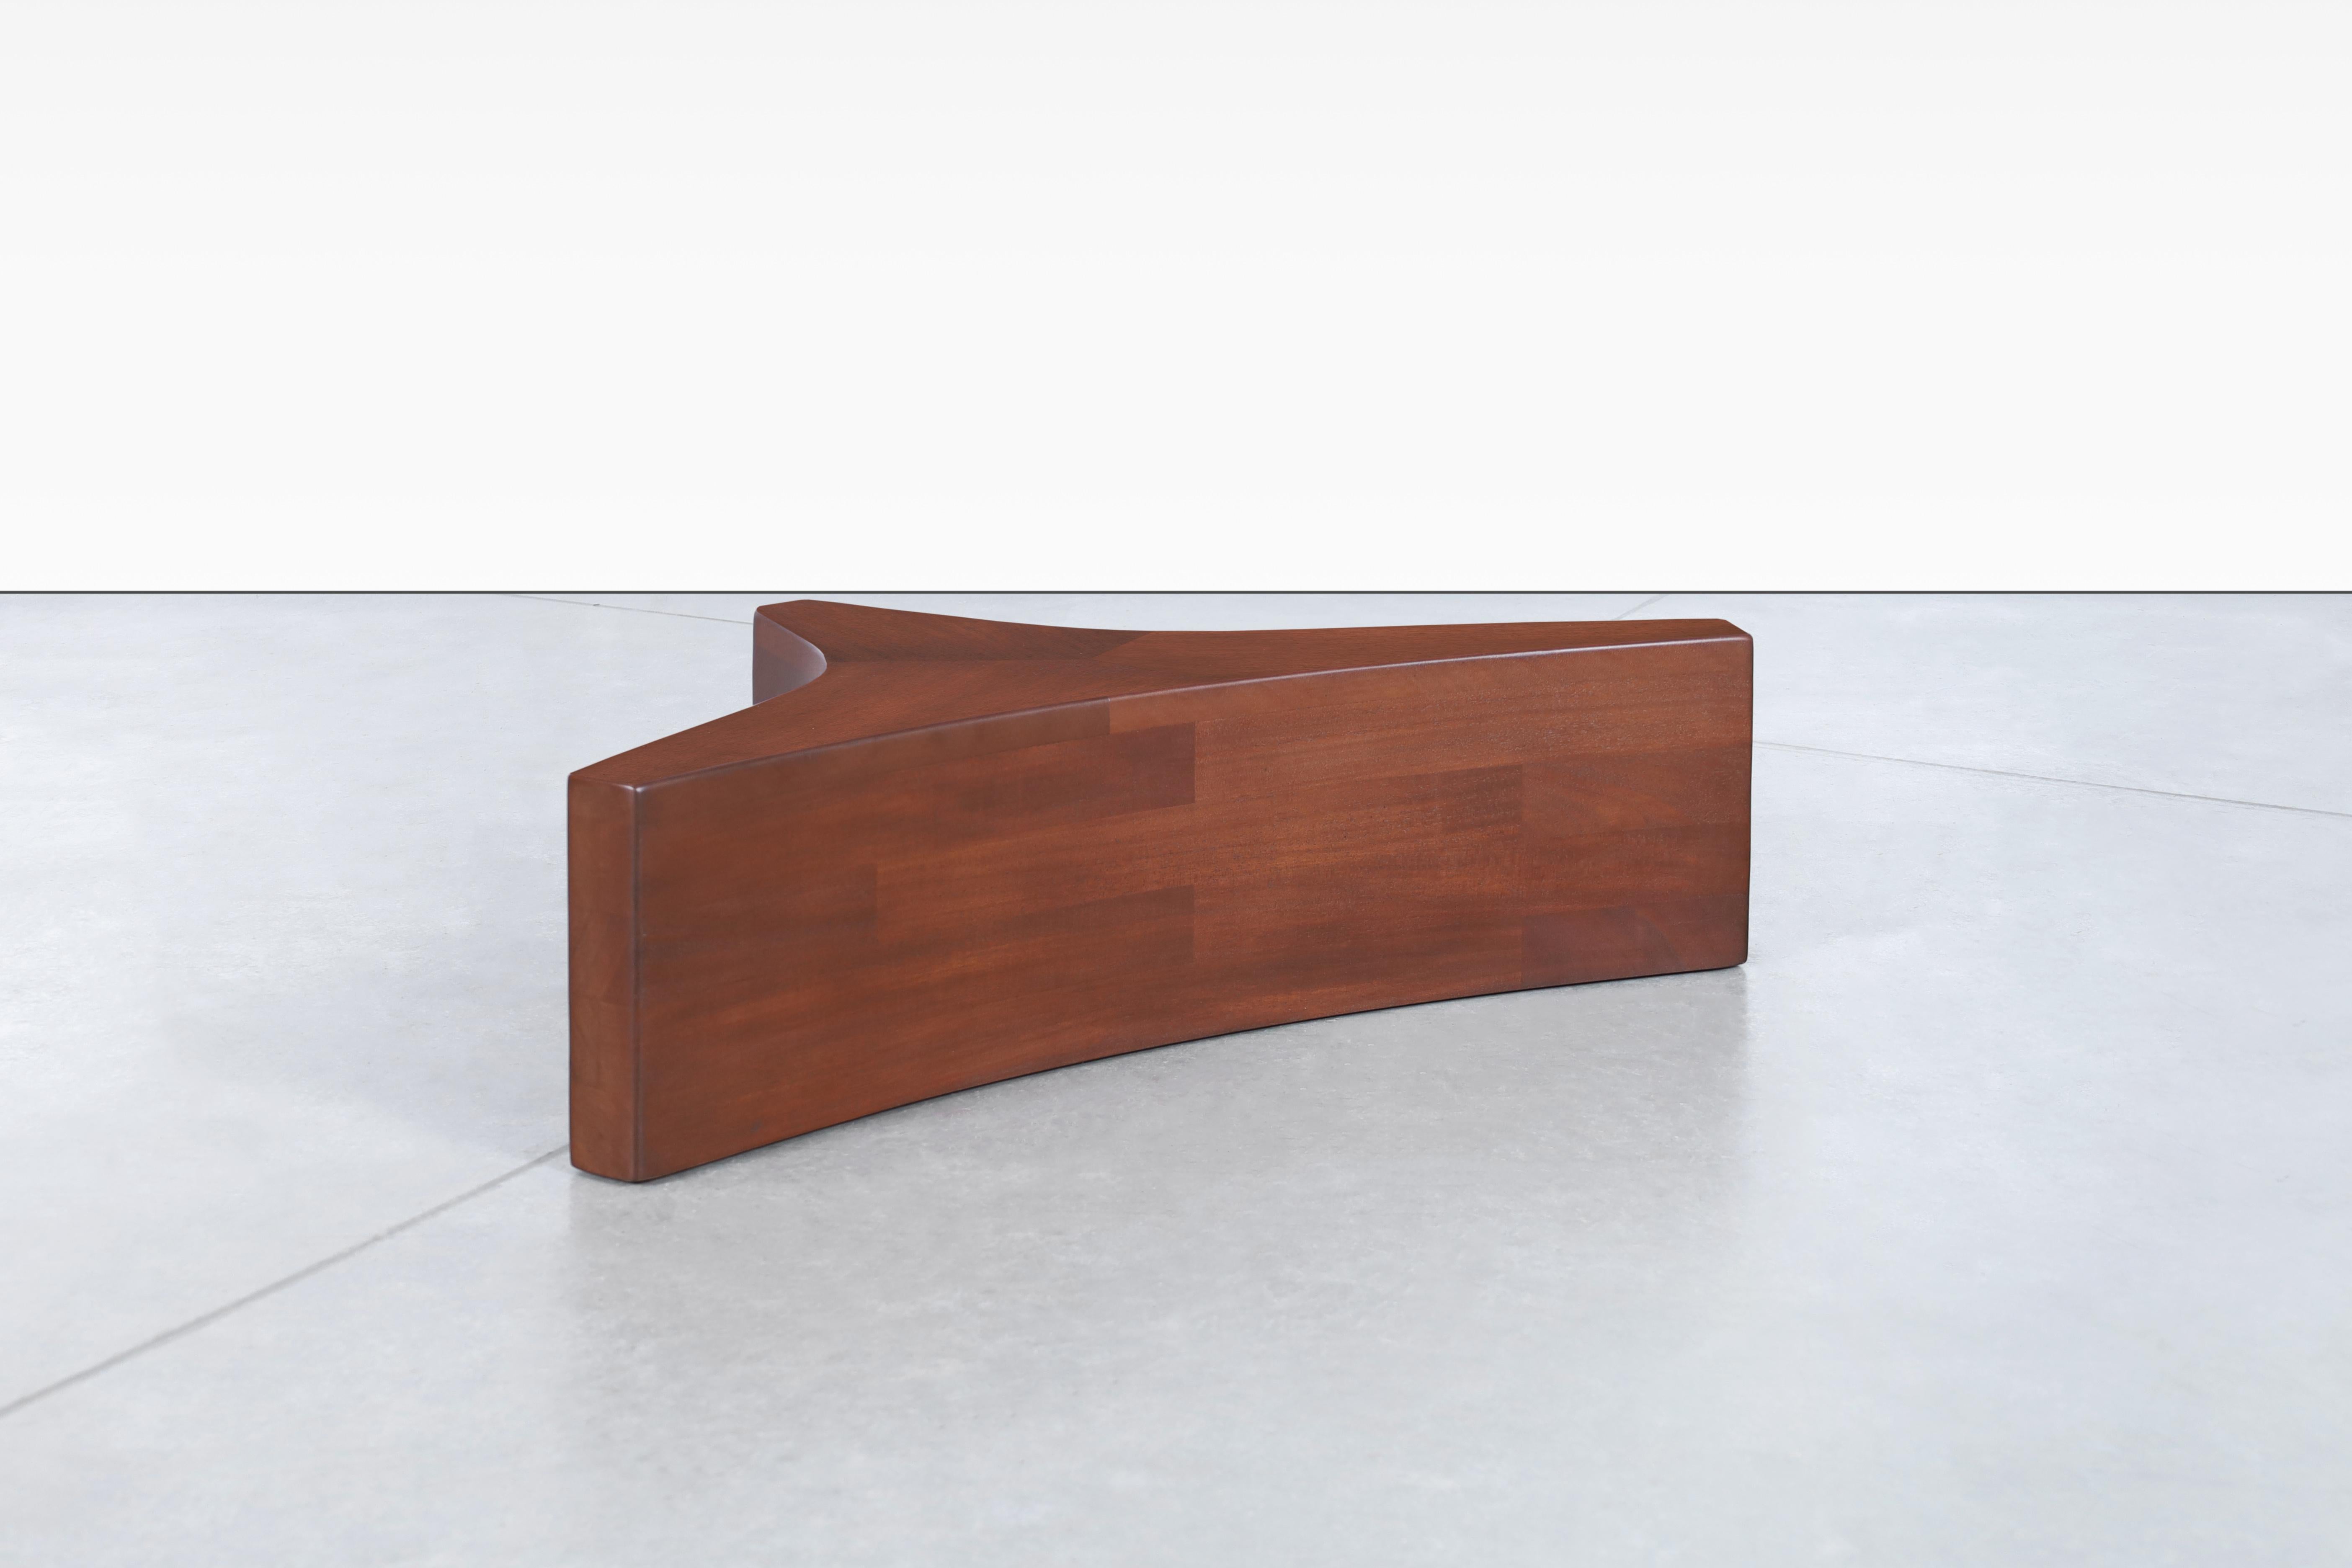 Beautiful mid-century walnut and glass biomorphic coffee table designed in the United States, circa 1960s. This coffee table is a true masterpiece inspired by the iconic designs of Vladimir Kagan. Crafted from beautiful walnut, this piece exudes